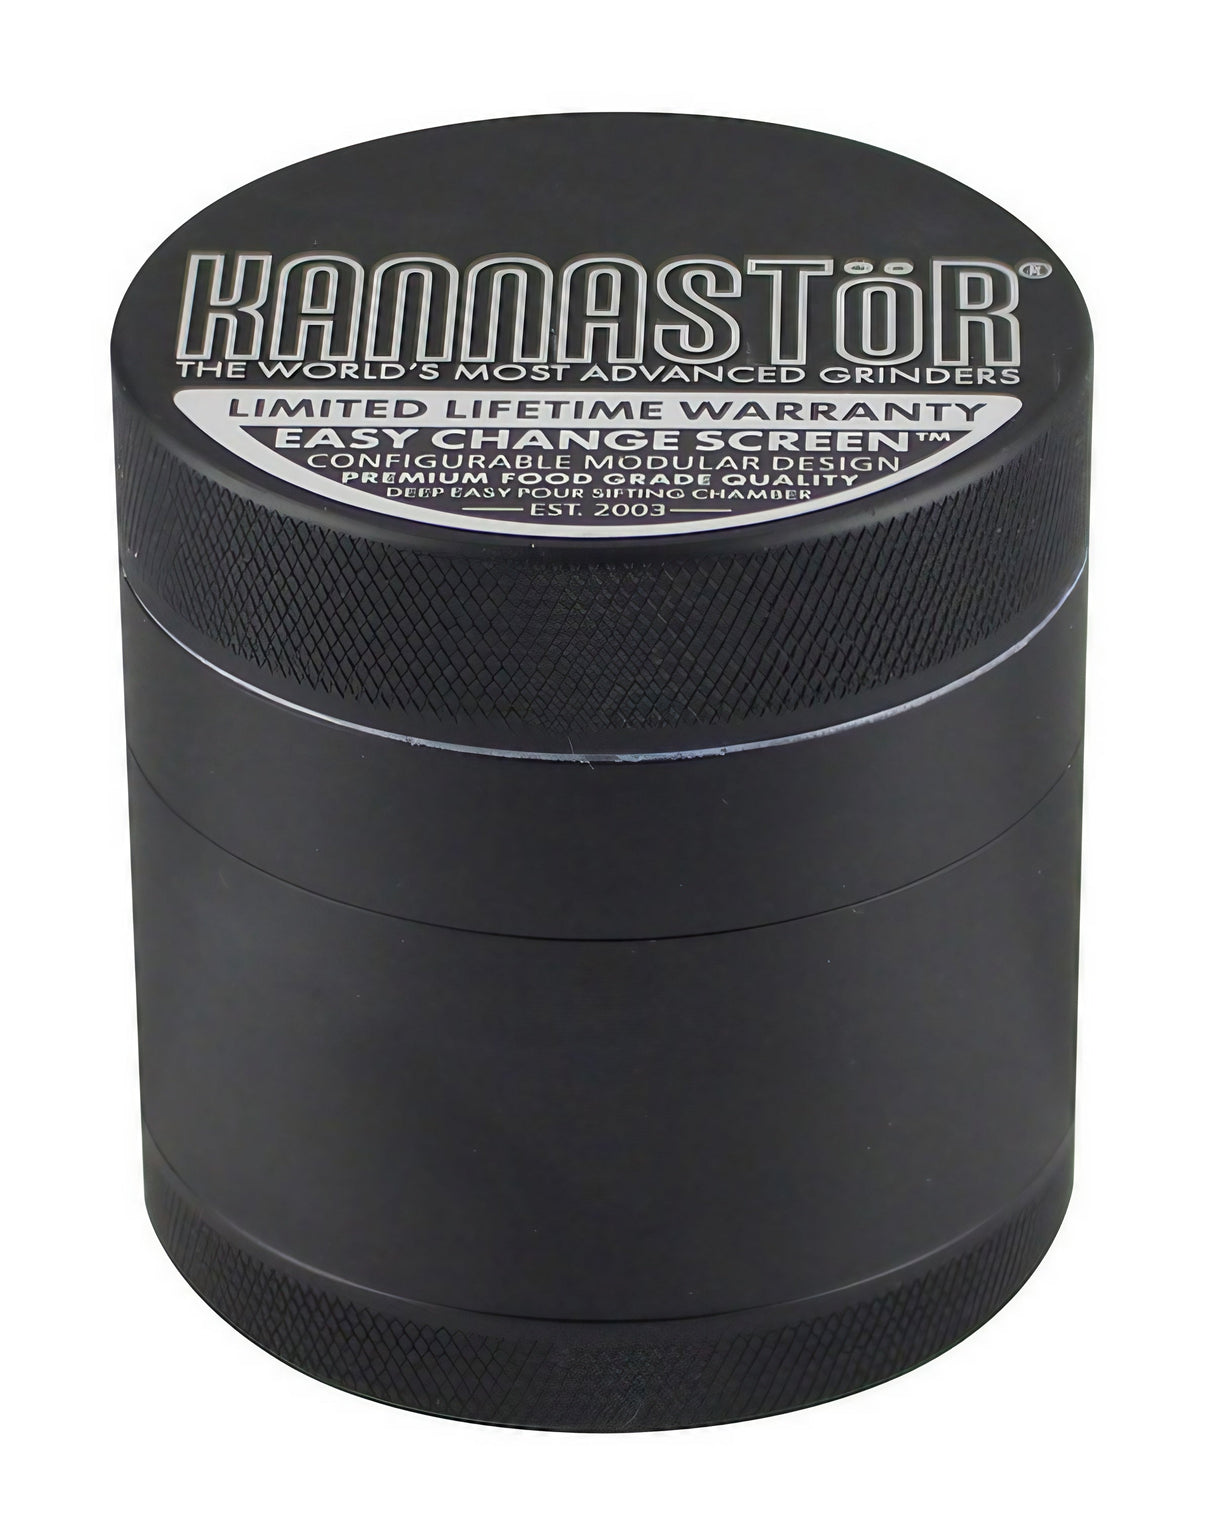 Kannastor 2.5" Multi Chamber Aluminum Grinder, 4-Part Design with Closable Lid - Front View